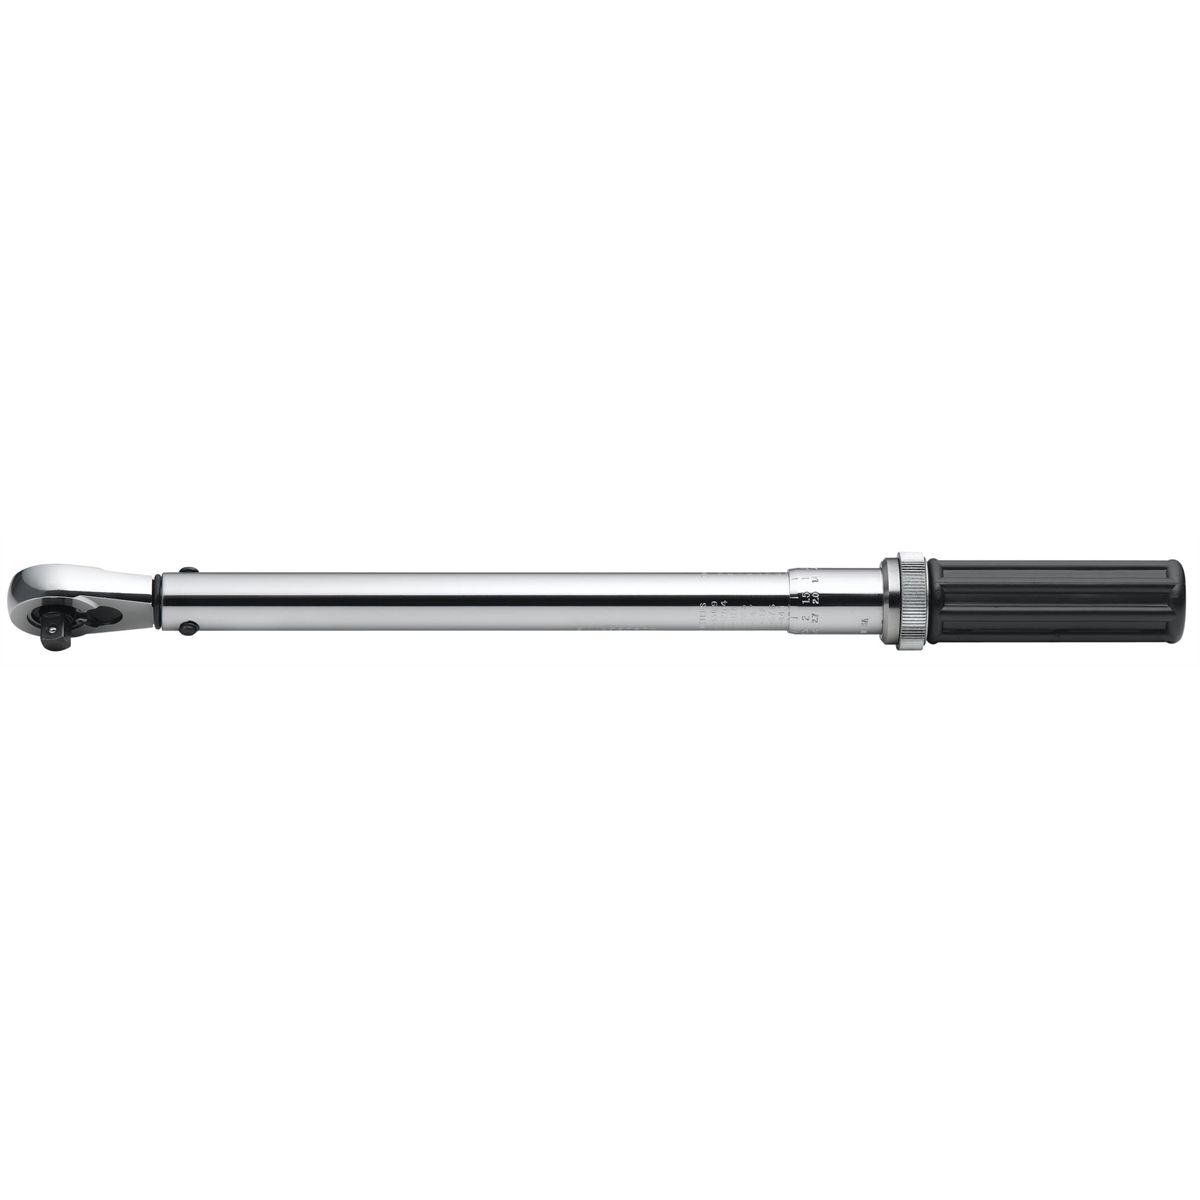 GearWrench 1/2 In Micrometer Torque Wrench - 20-150 ft-lbs